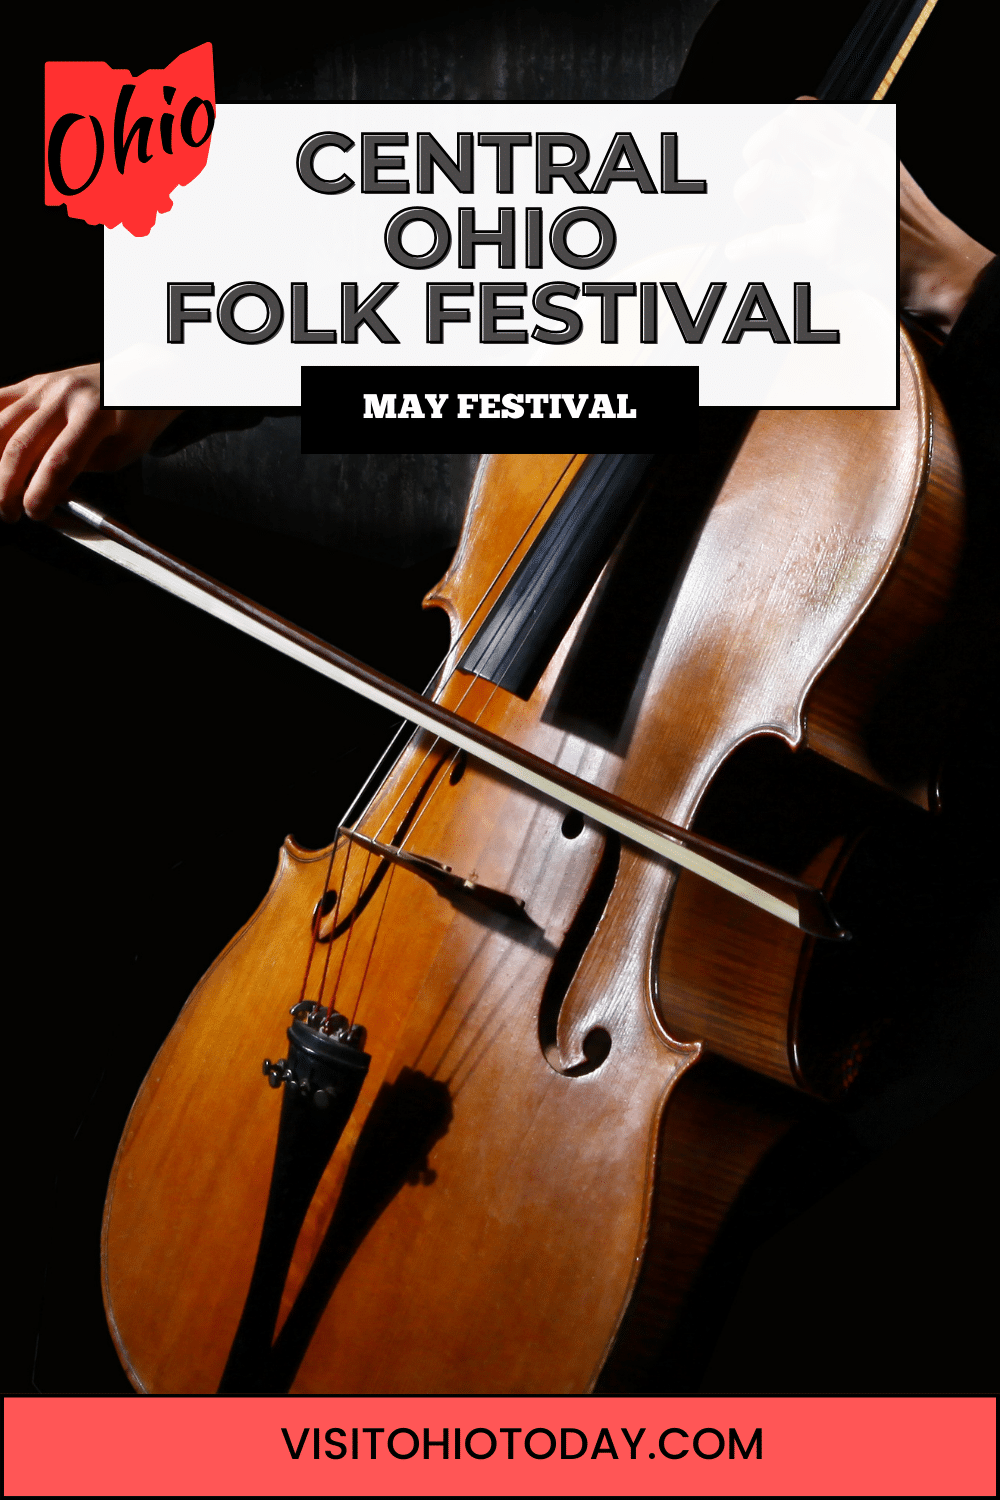 Central Ohio Folk Festival is an annual folk music festival that will take place in early May at the Highbanks Metro Park in Lewis Center.